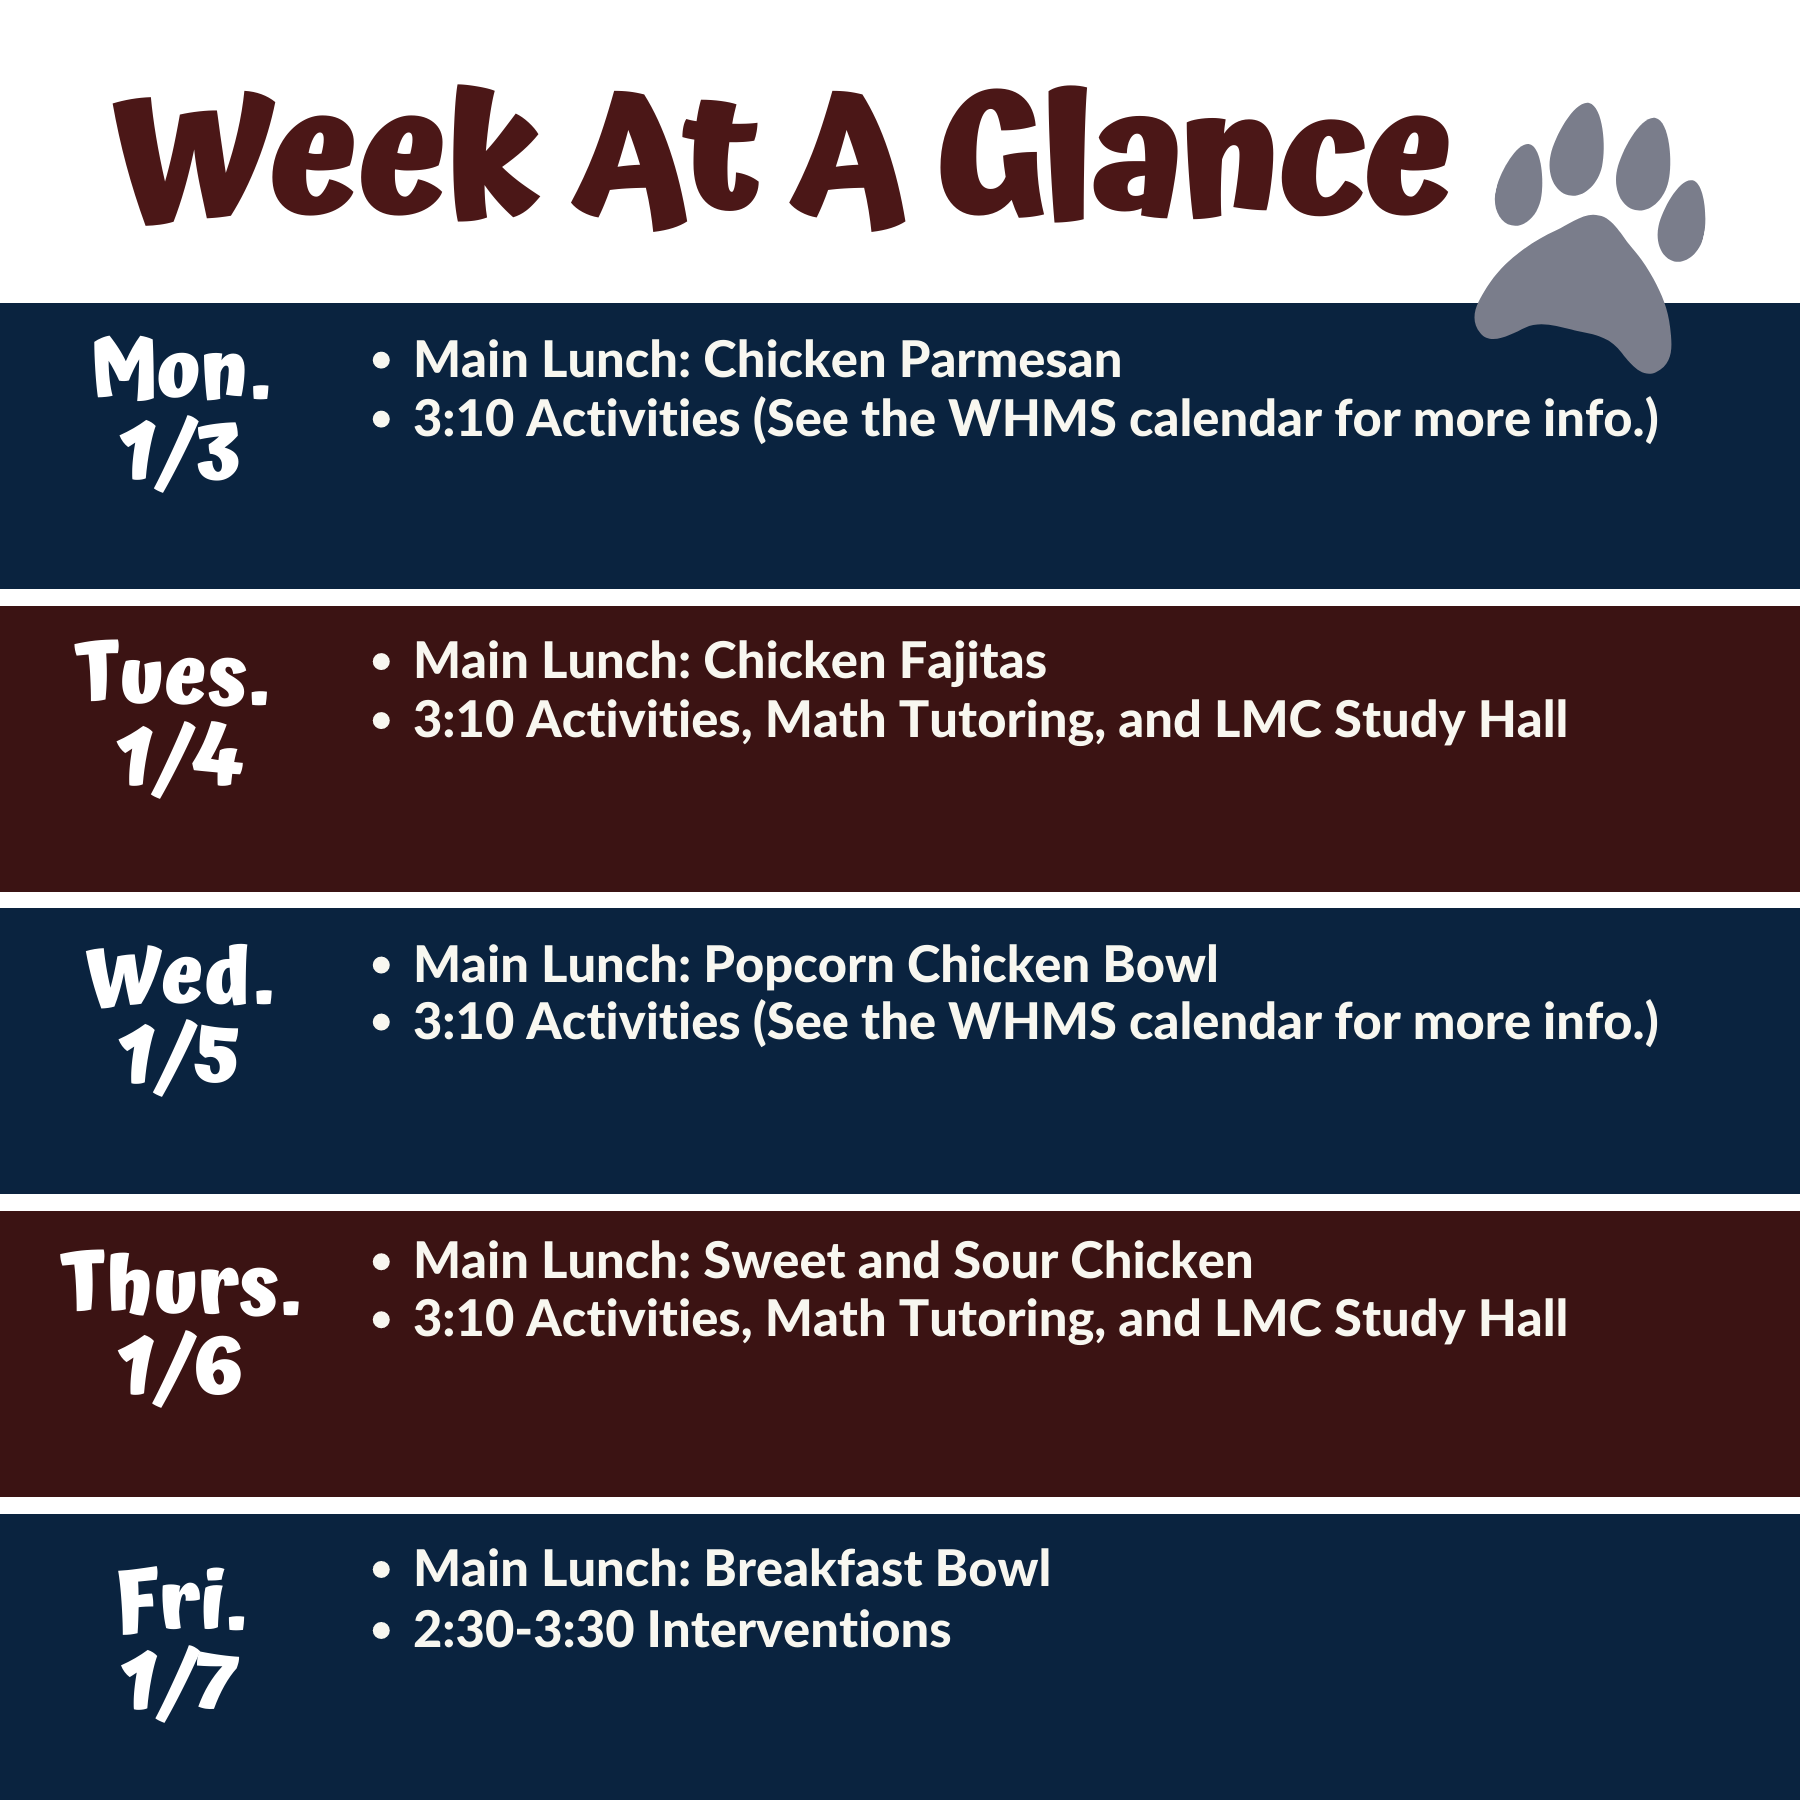 Week at a Glance for January 3-7, 2022